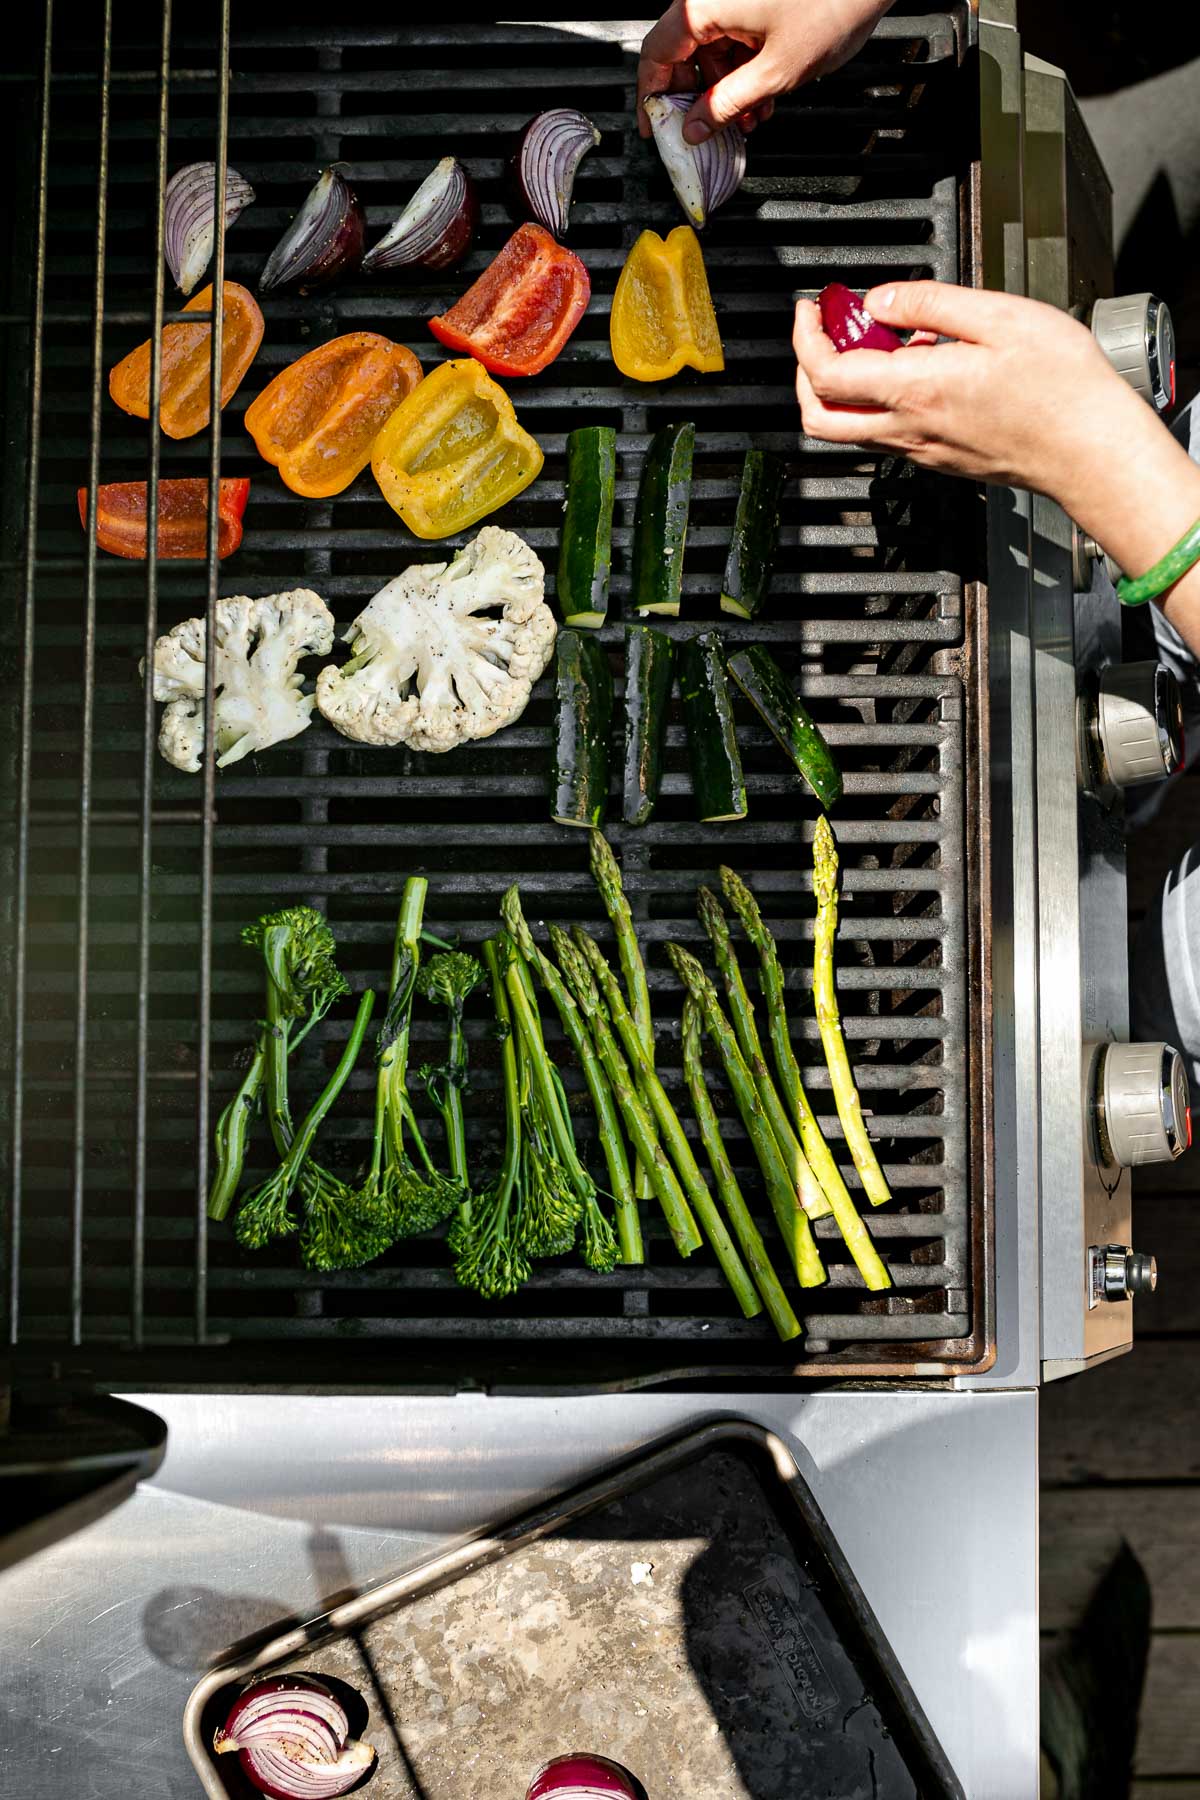 An overhead shot of a woman's hands placing a variety of raw veggies on top of gas grill grates for grilling. These veggies include broccolini, asparagus, cauliflower, zucchini, onion, & peppers. A aluminum baking sheet sits on the shelf to the left of the grill with additional onions ready to be placed on the grates.